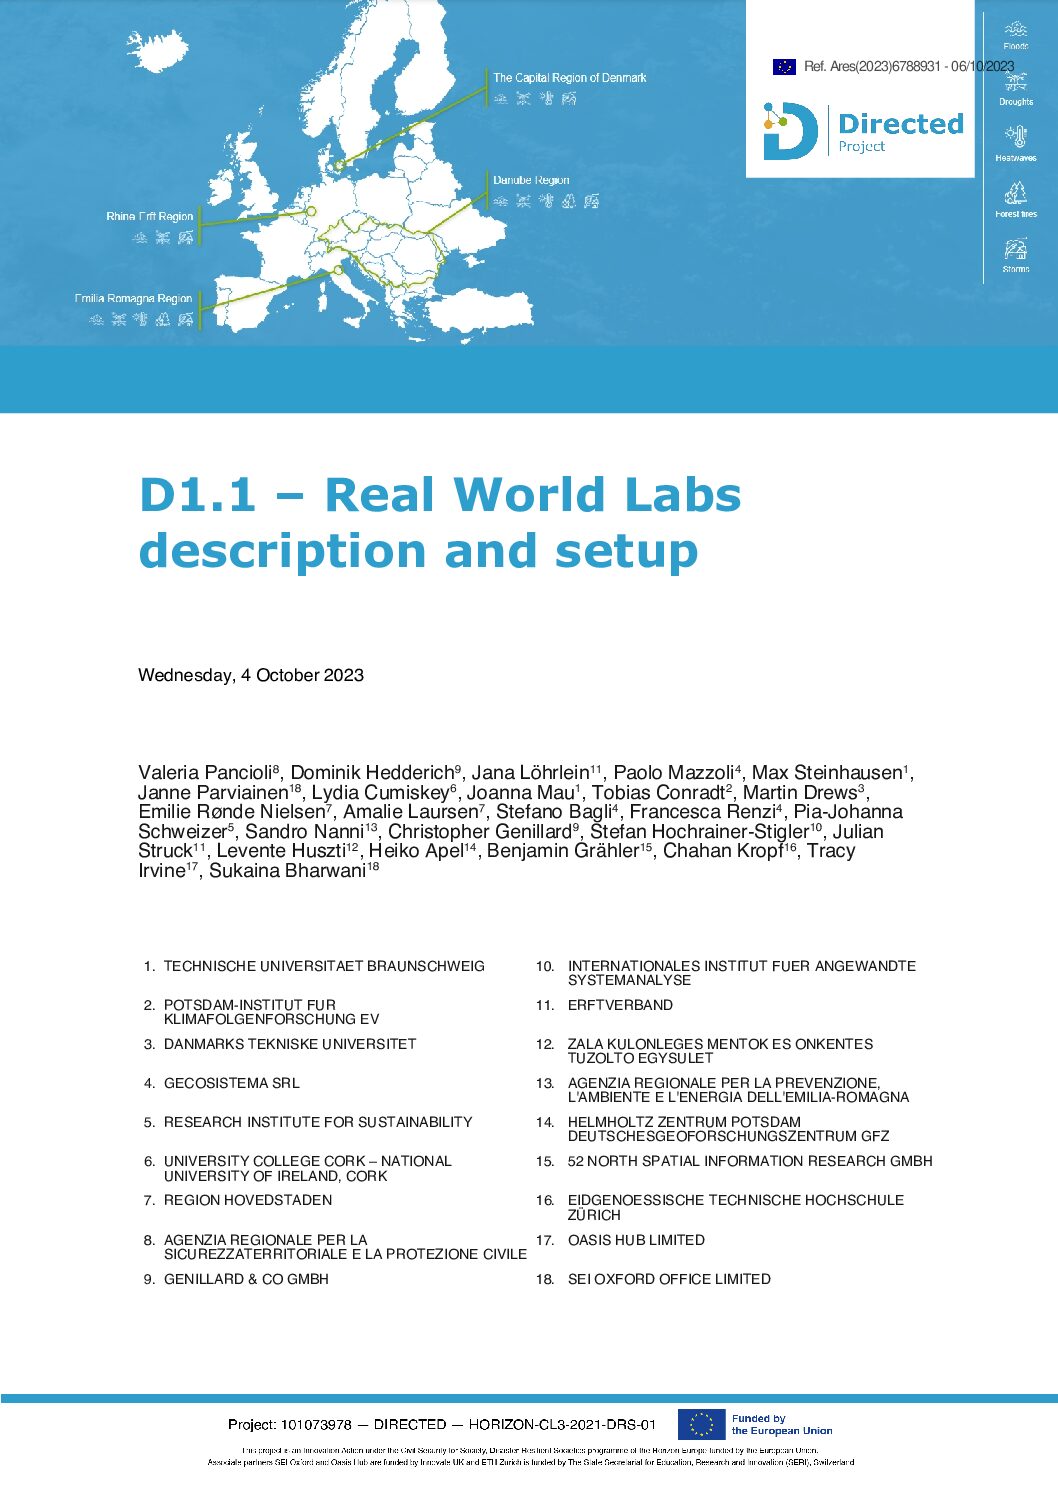 Real World Labs - Description and Set-up